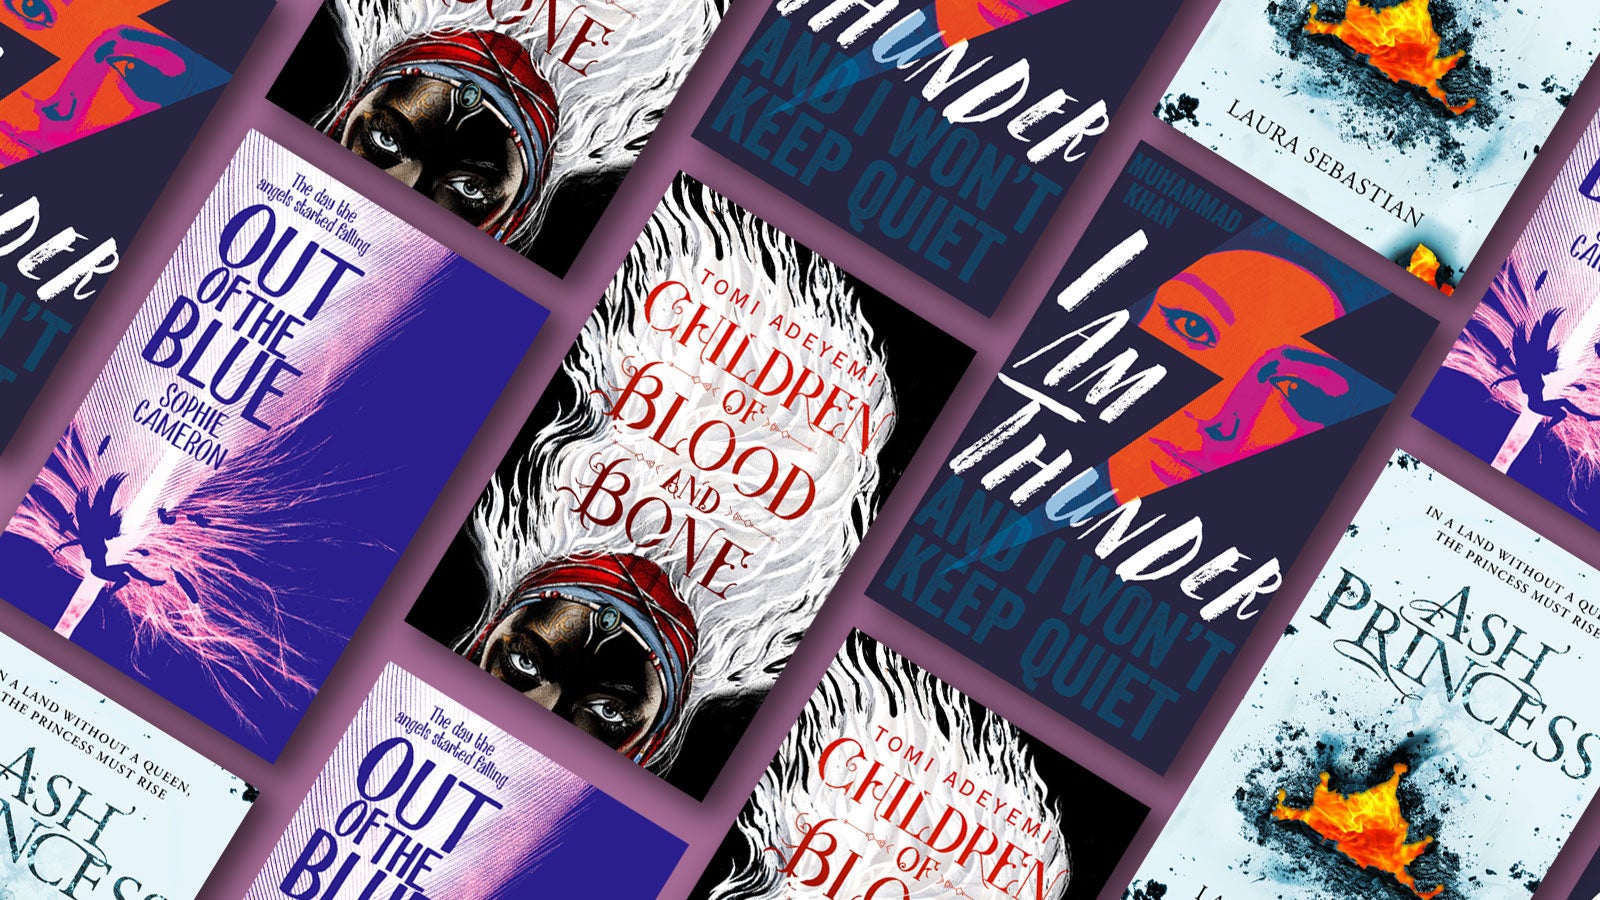 Tiled effect of book covers for Children of Blood and bone, I am Thunder and Out of the Blue